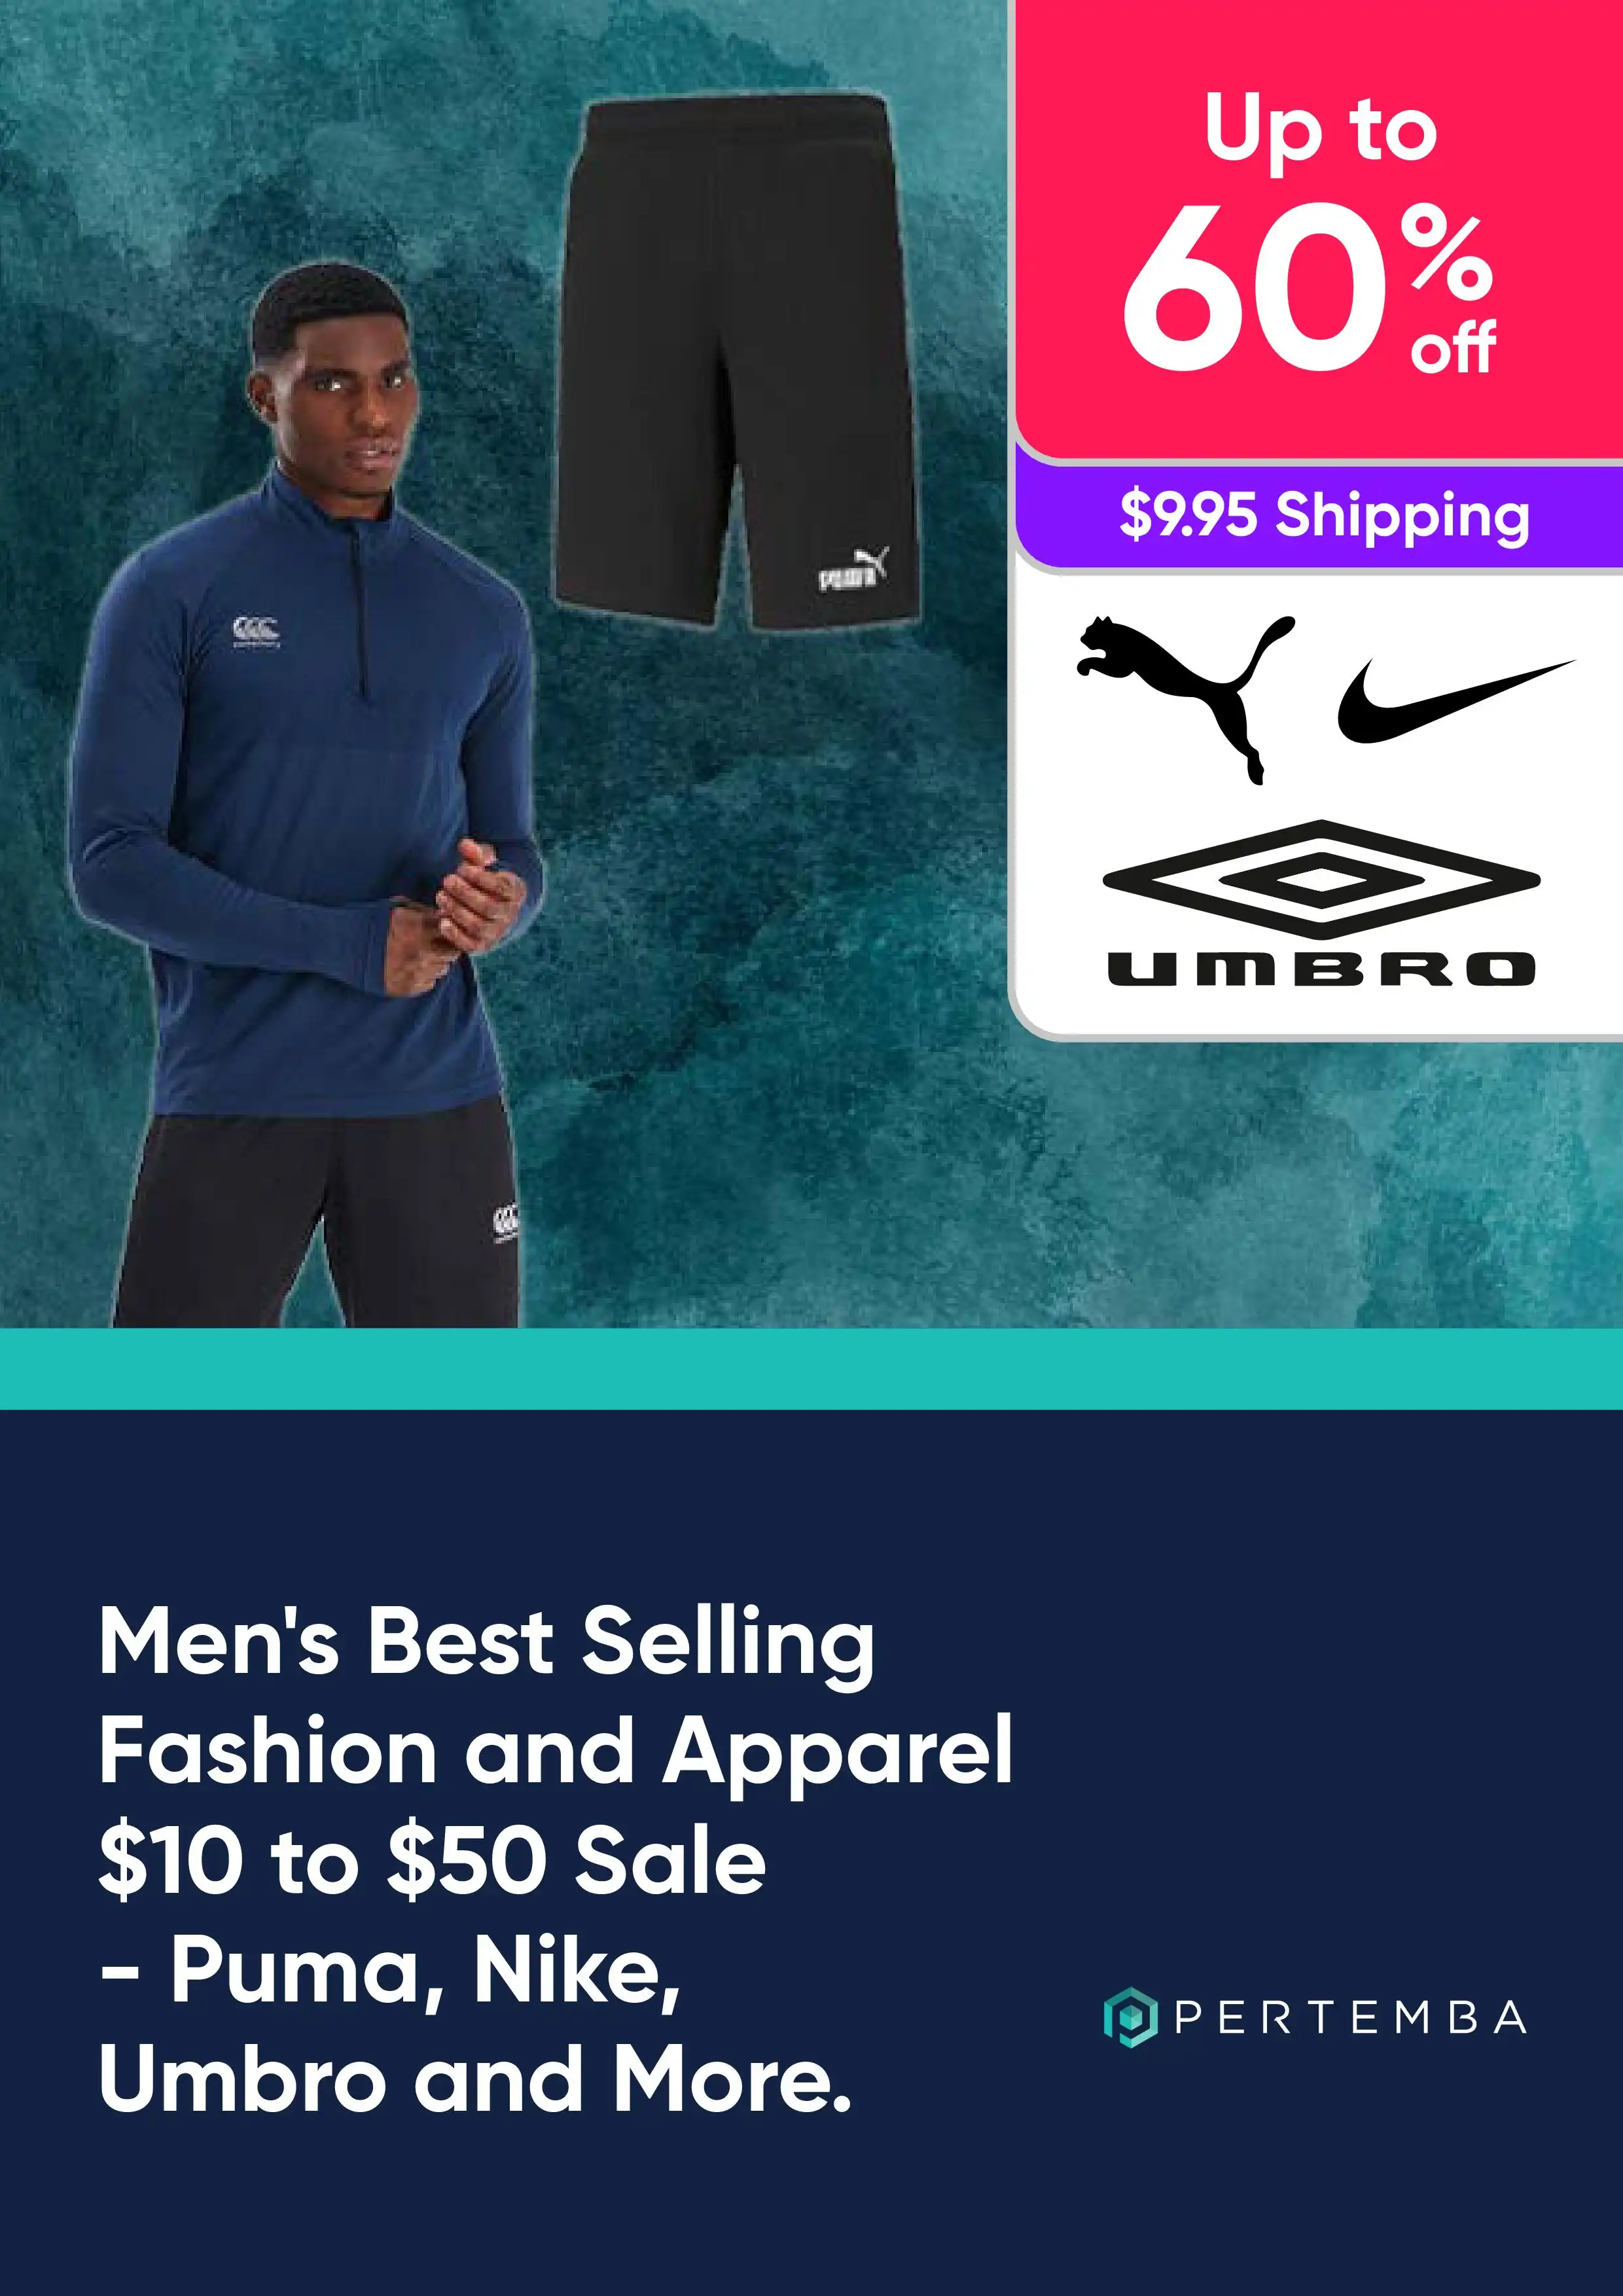 Men’s Best Selling Fashion and Apparel $10 to $50 Sale - Up to 60%